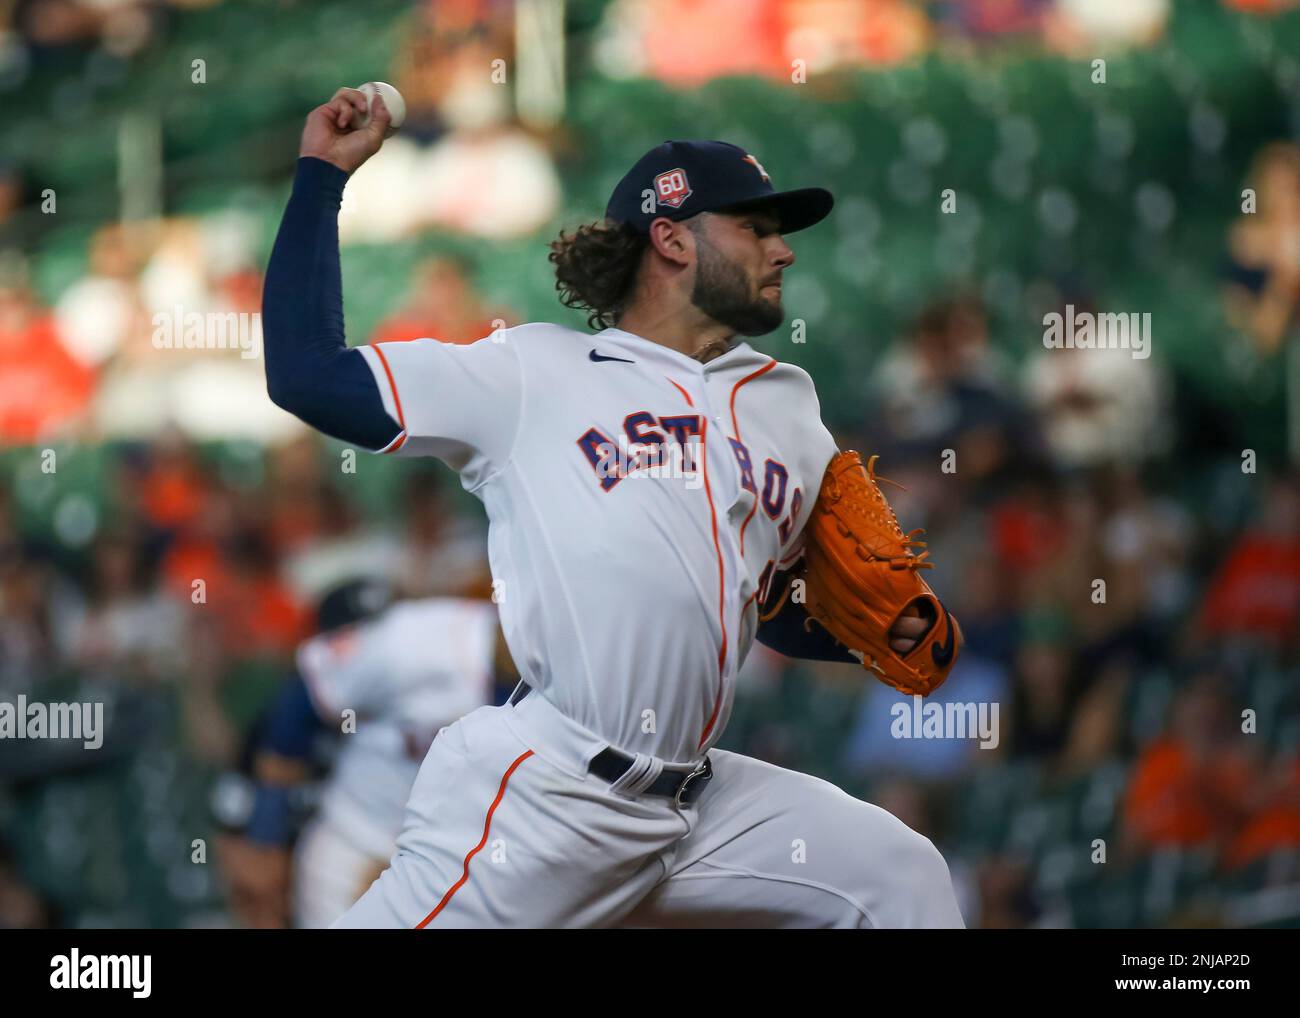 HOUSTON, TX - SEPTEMBER 15: Houston Astros starting pitcher Lance McCullers  Jr. (43) watches the pitch in the top of the first inning during the MLB  game between the Oakland Athletics and